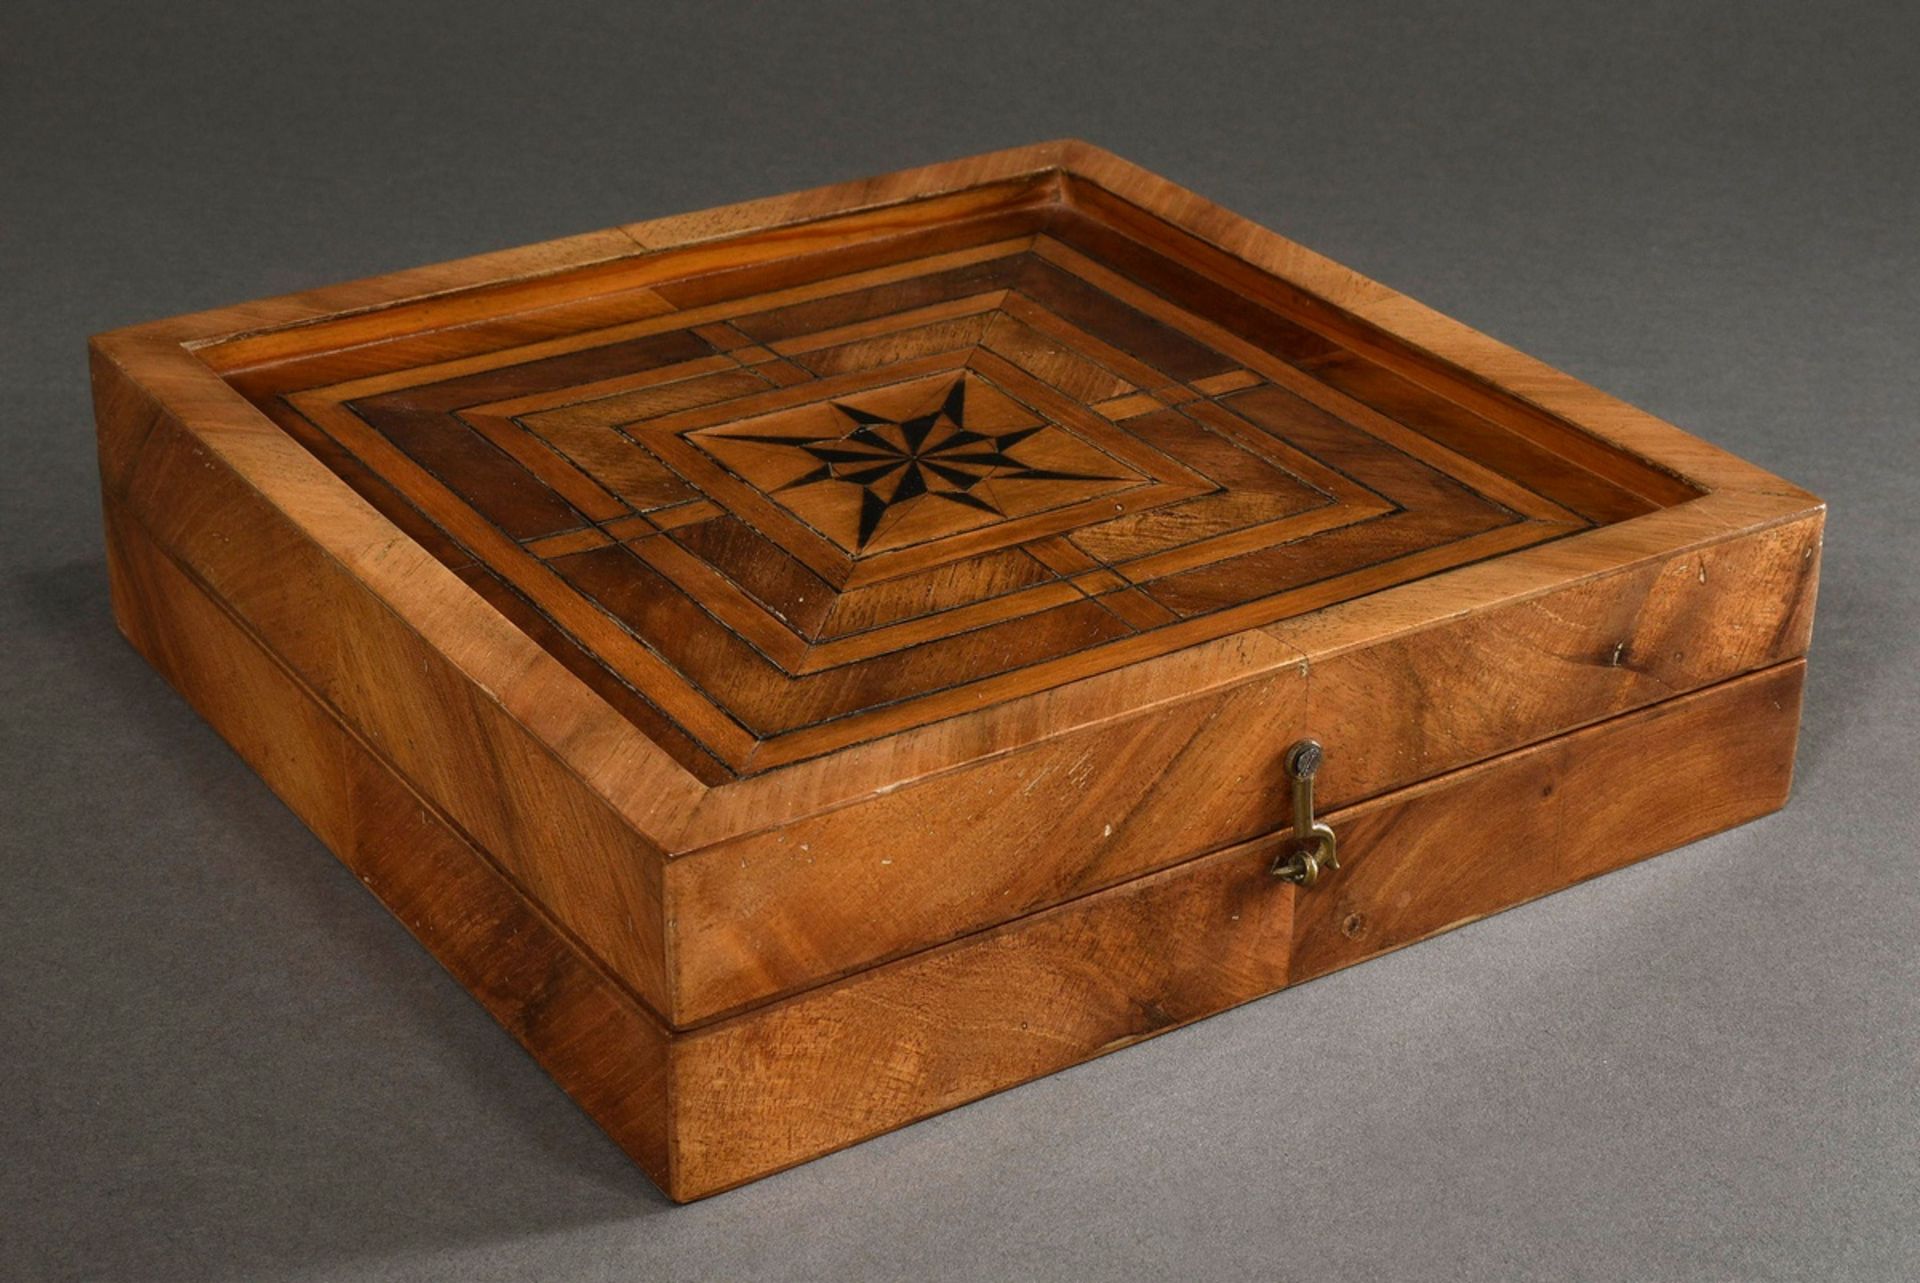 Small box with playing fields for mill, chess and backgammon, 19th c., fruitwood veneered on softwo